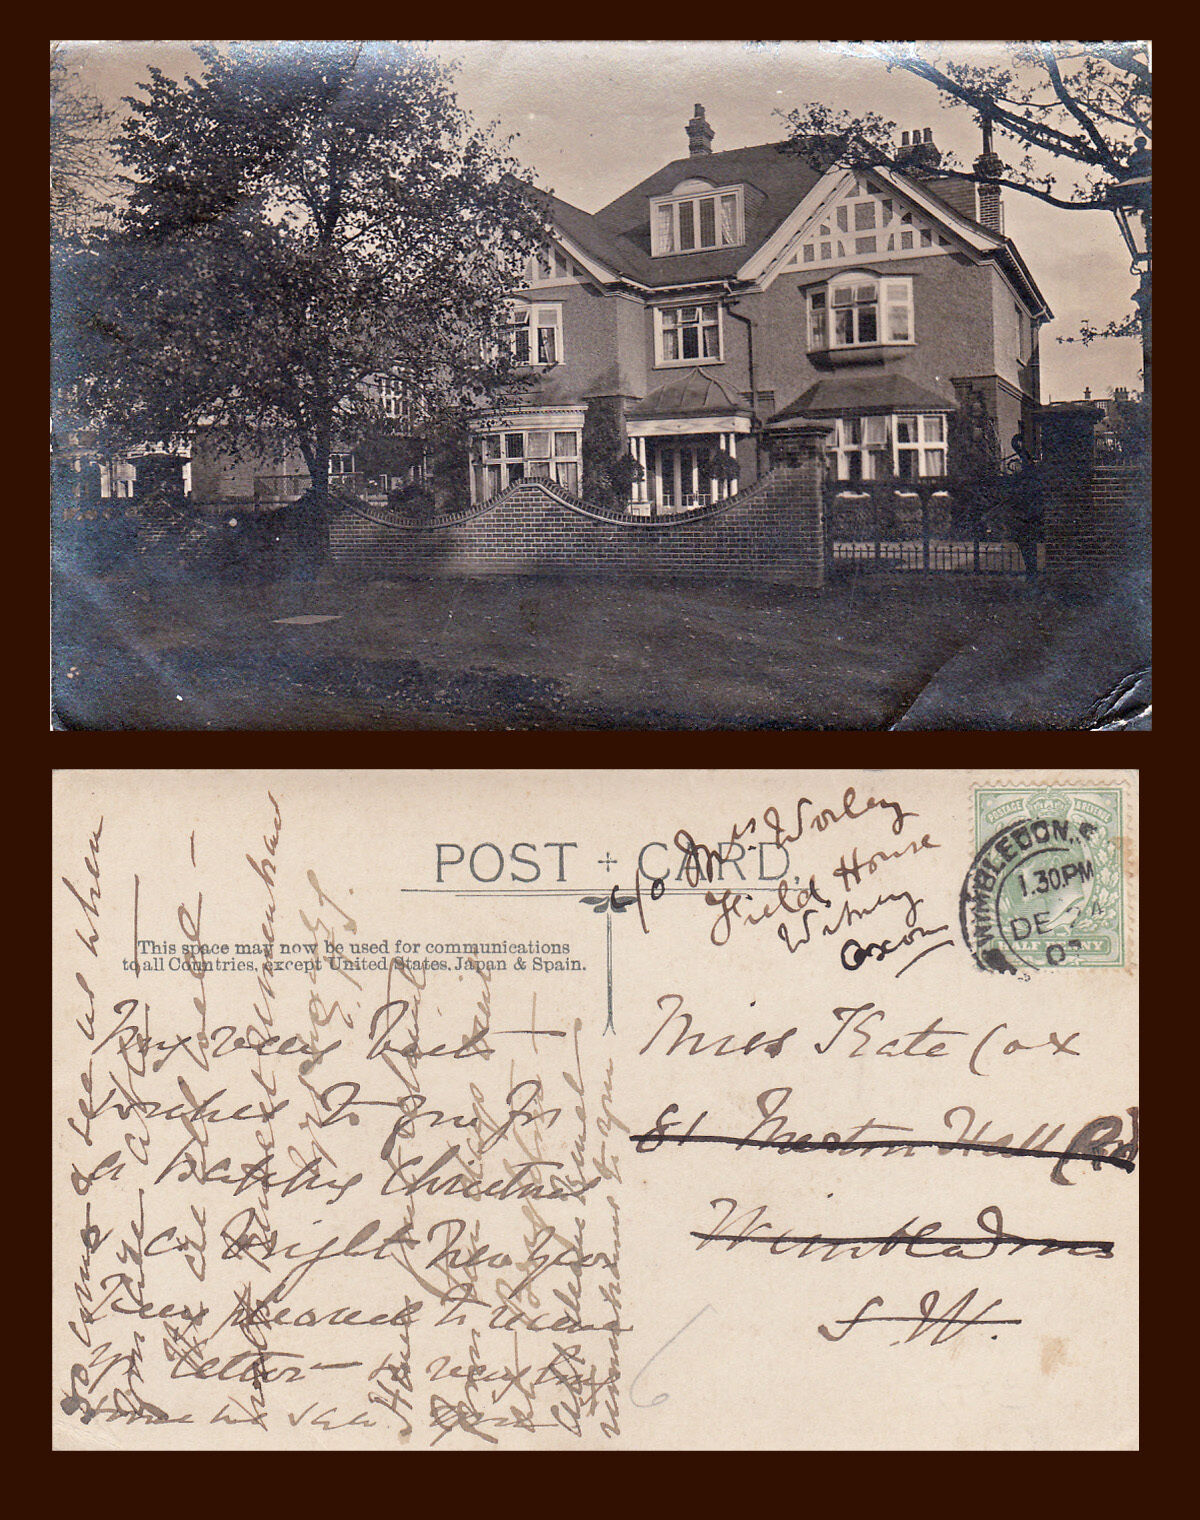 UK LONDON WIMBLEDON LARGE HOME POSTED 1907 TO MISS KATE COX, WITNEY OXFORDSHIRE.